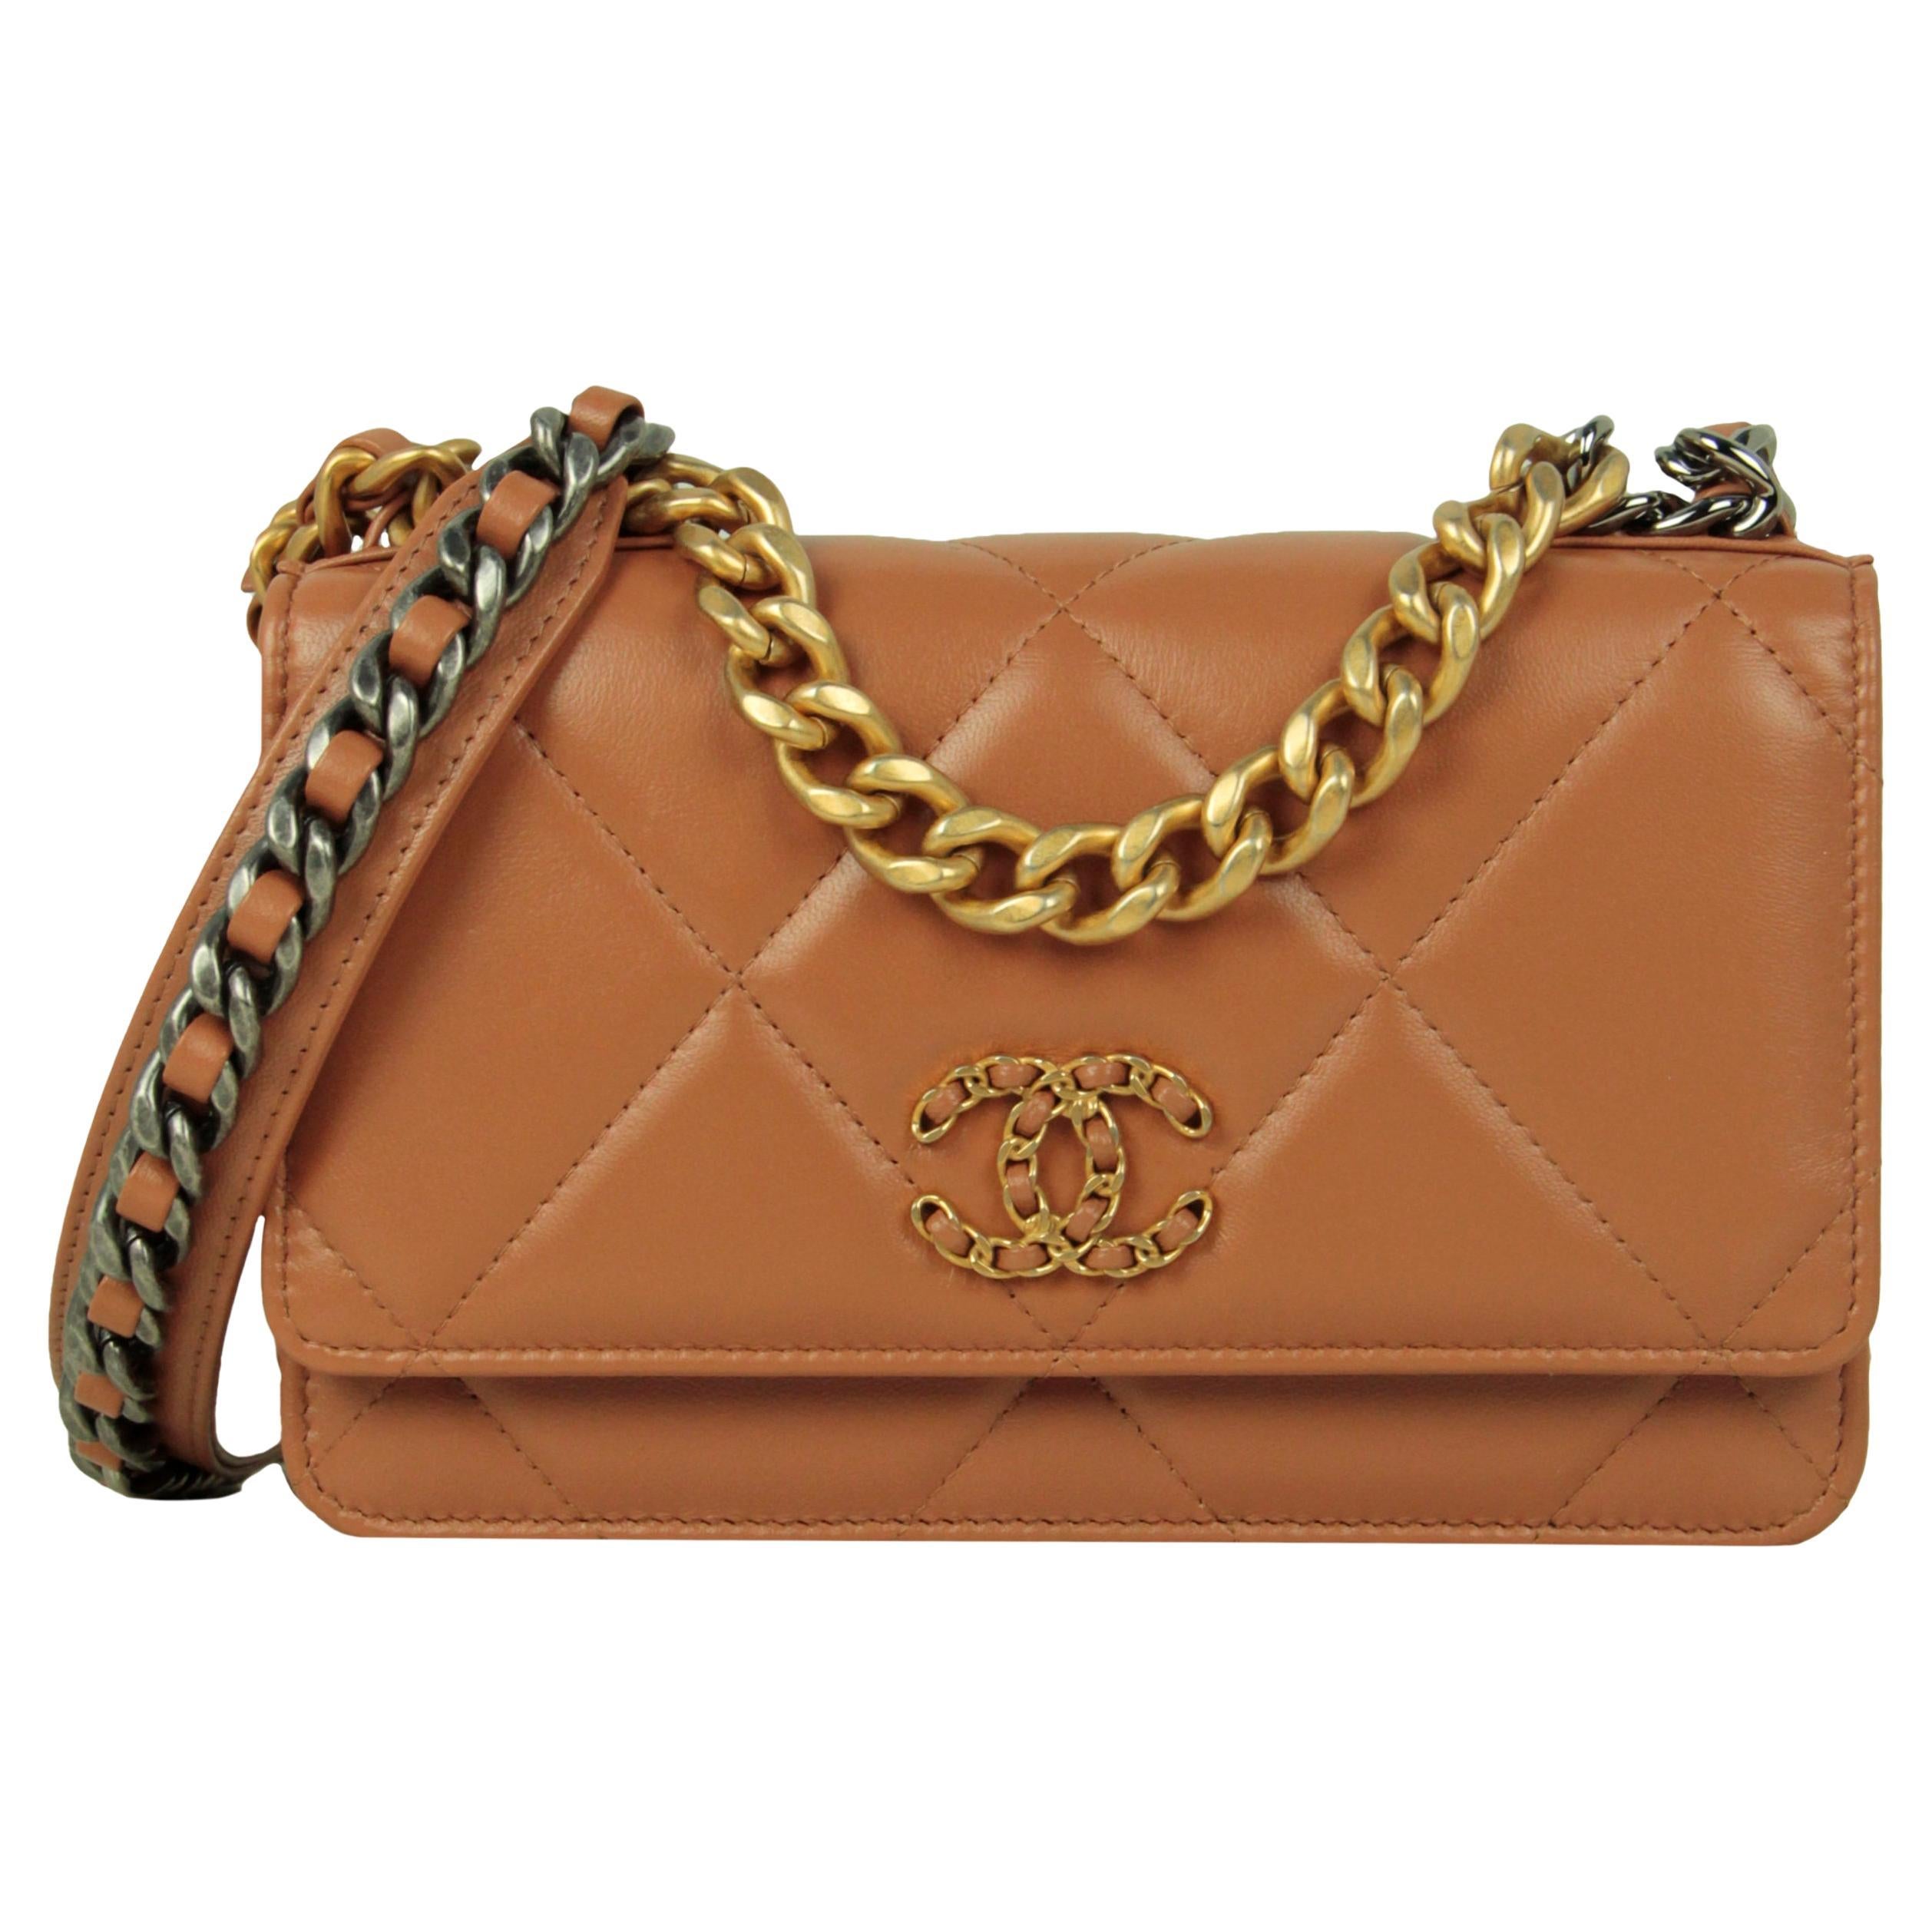 brown leather chanel purse